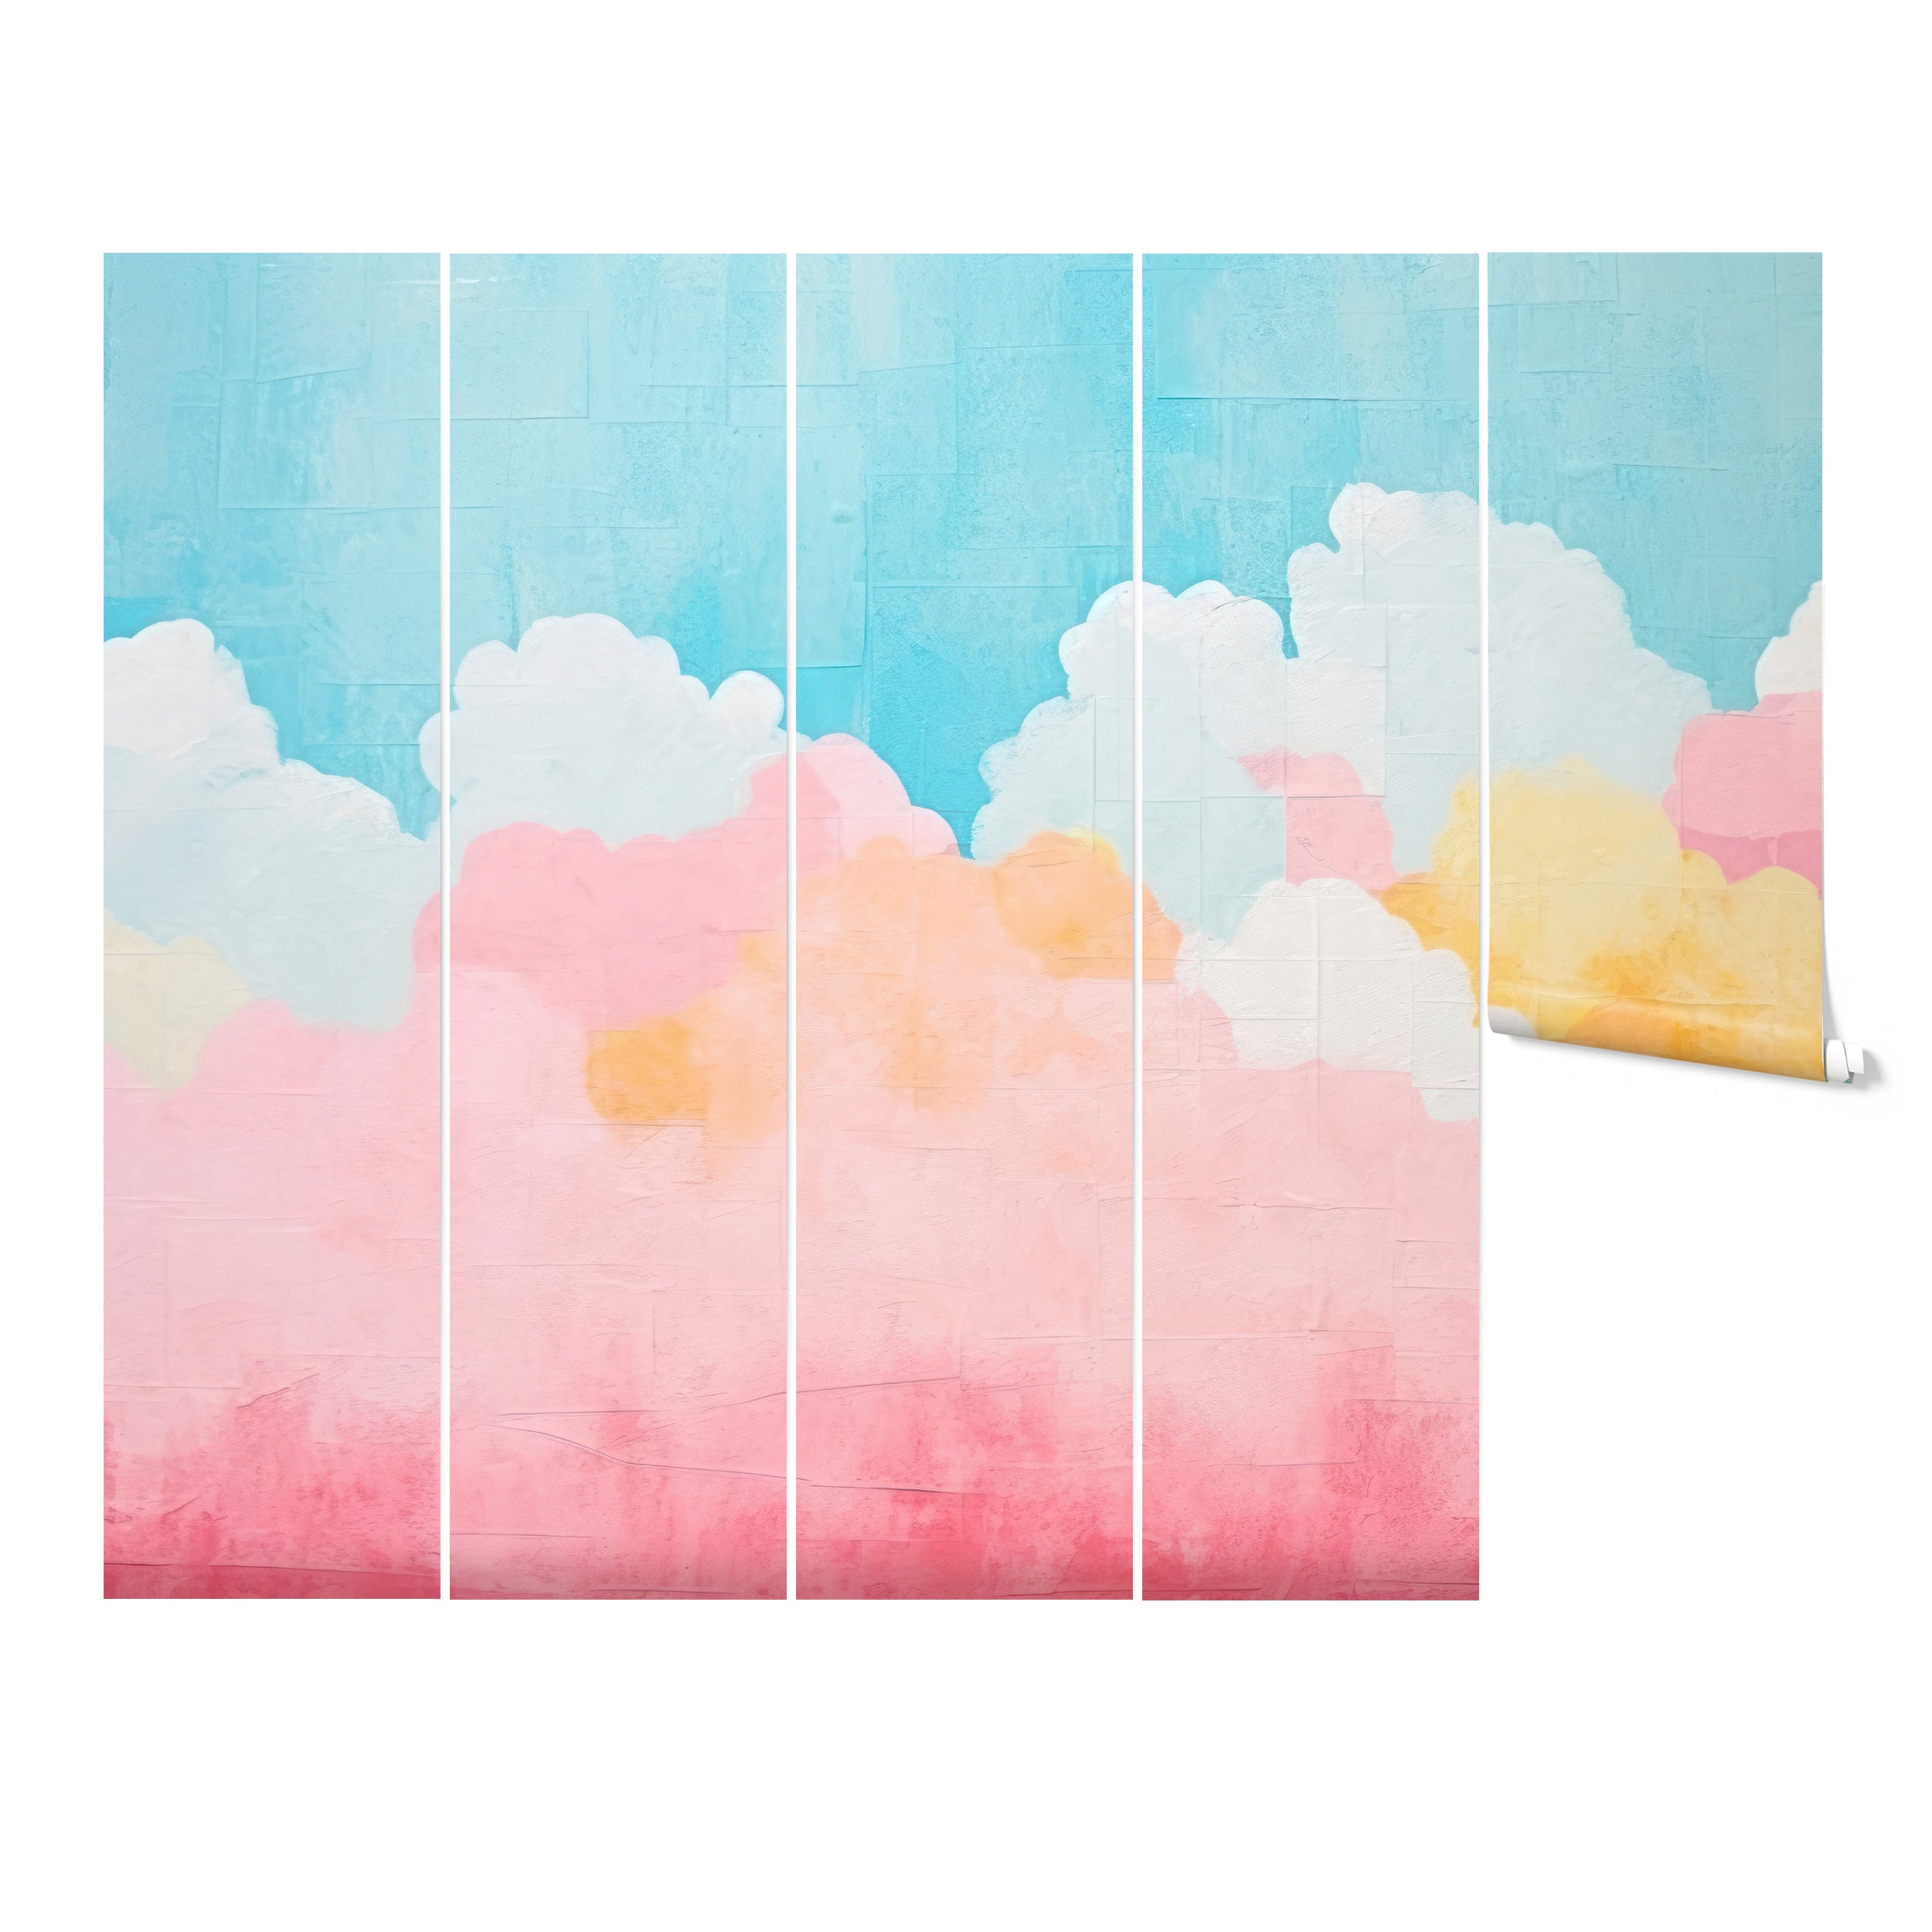 "Rolled wallpaper of the 'Candy Clouds Mural' ready for installation, displaying soft pastel clouds that promise to brighten any child's room."